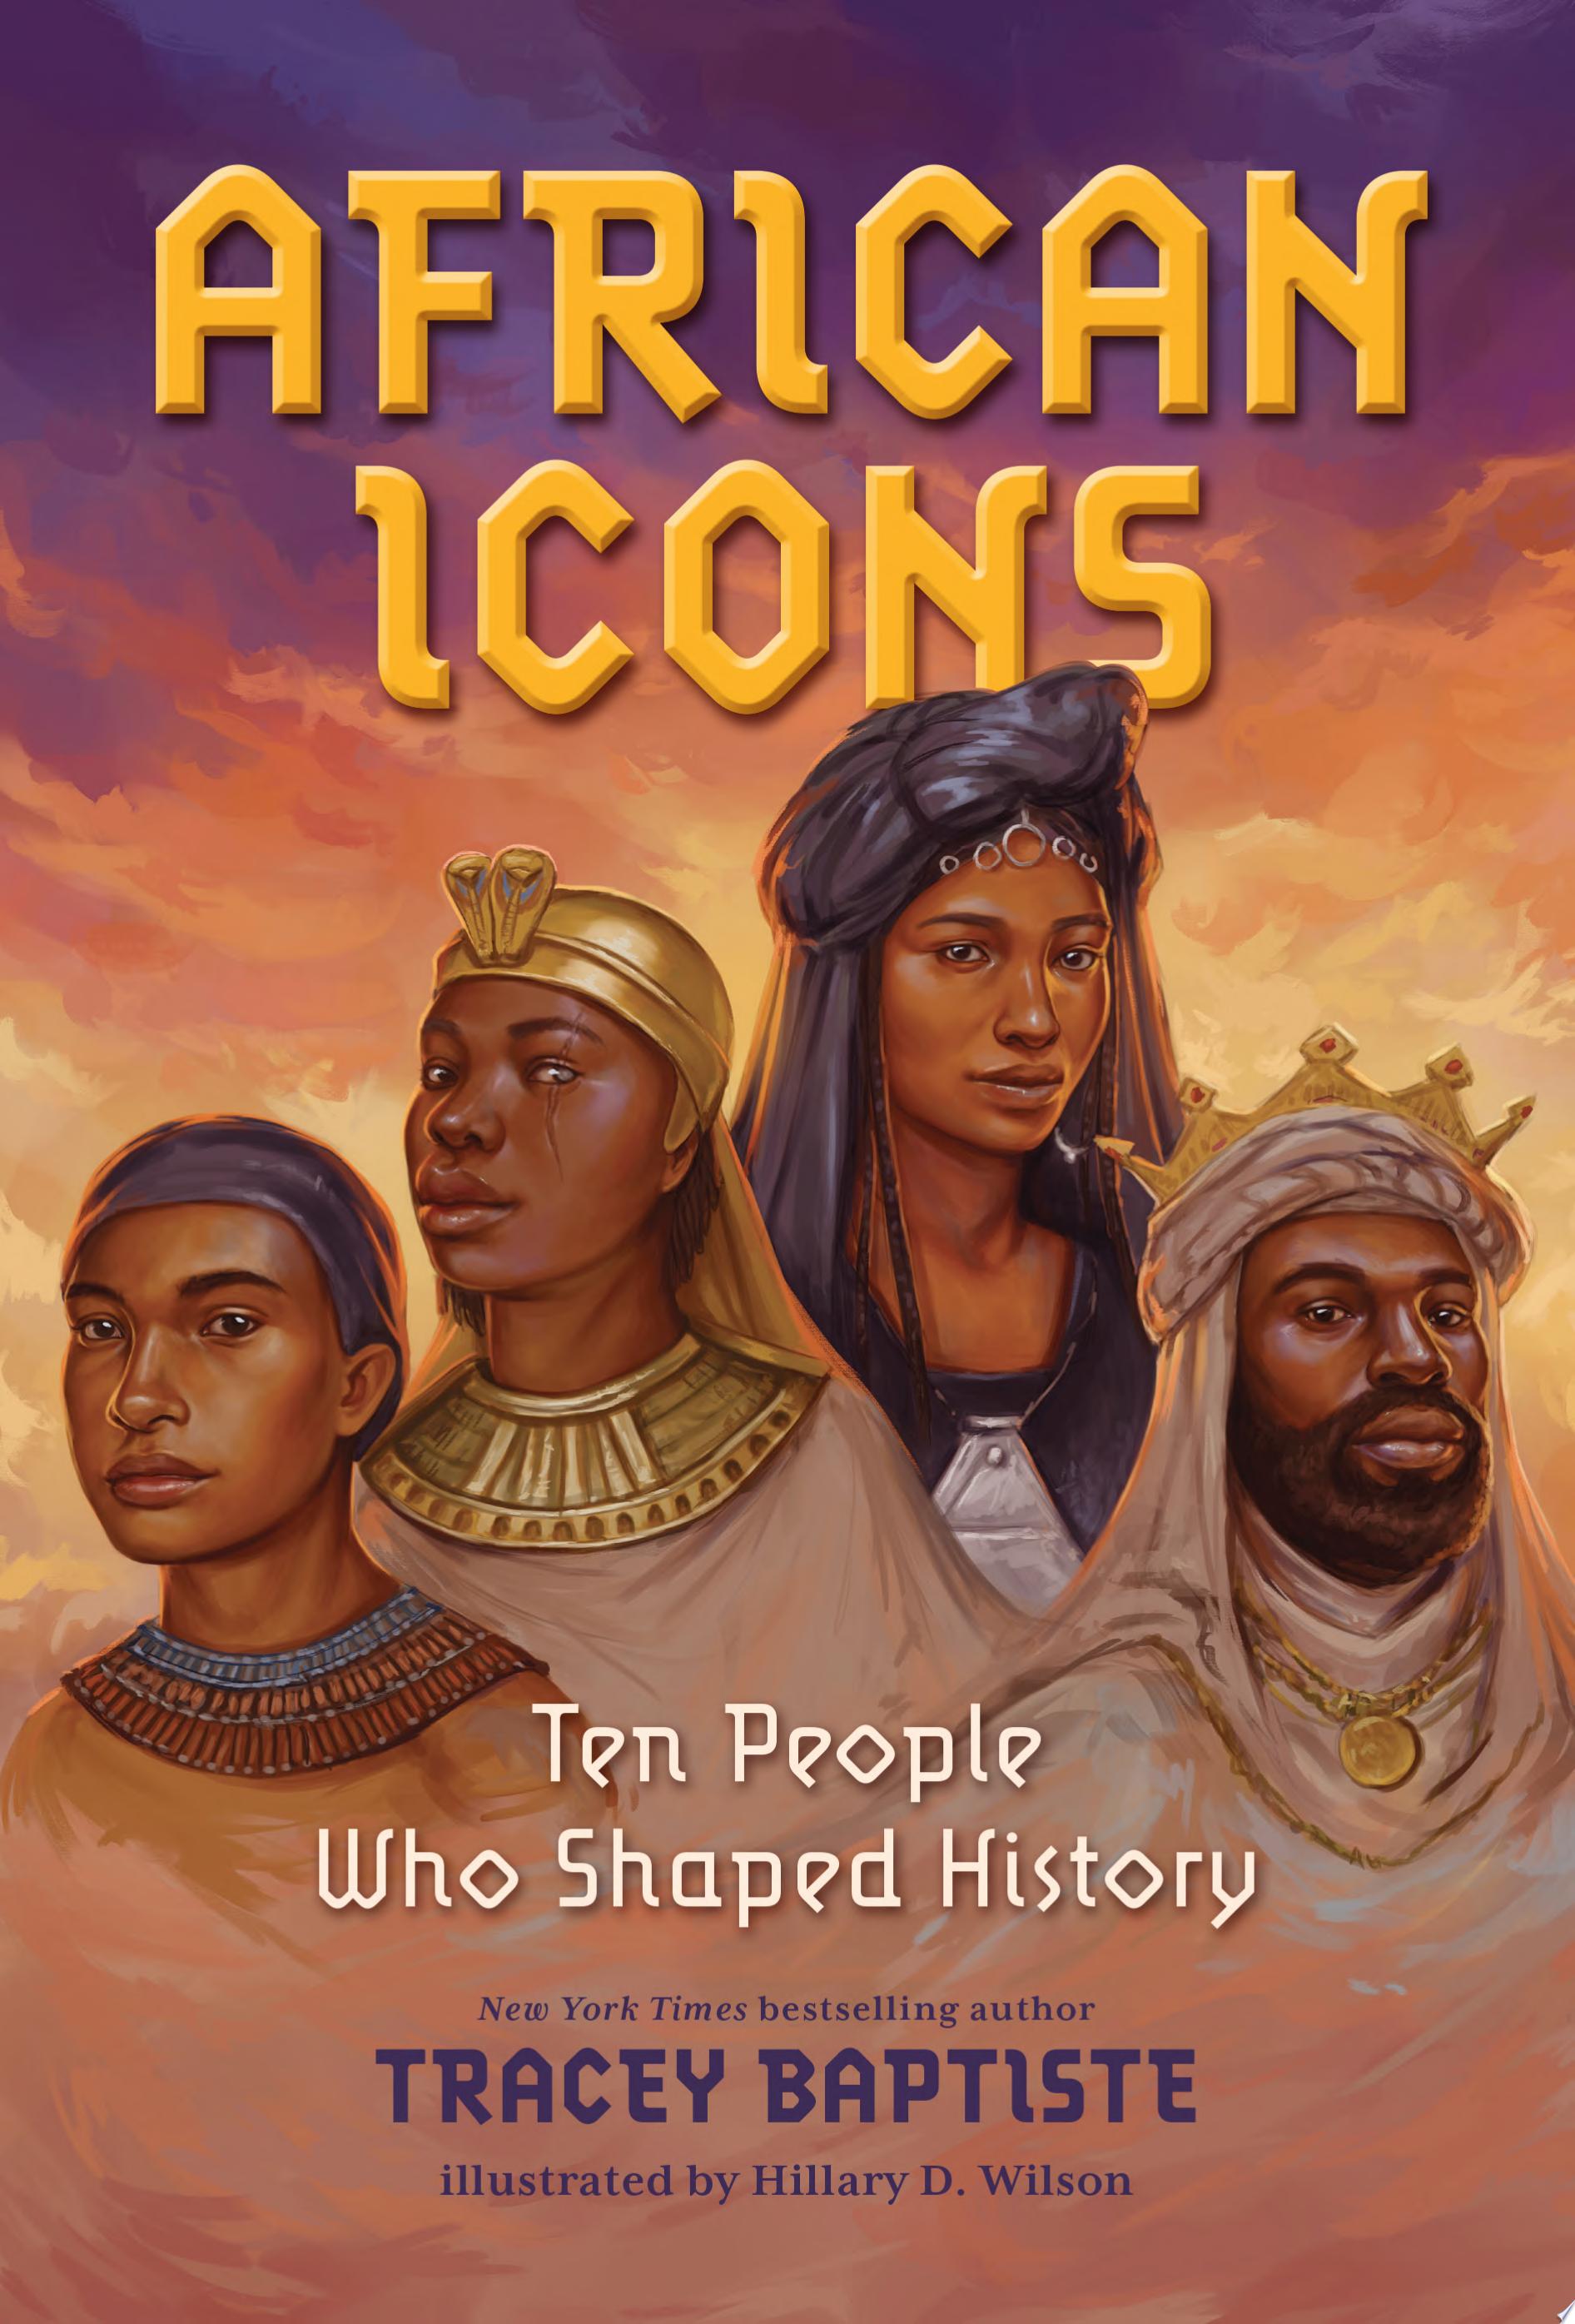 Image for "African Icons"